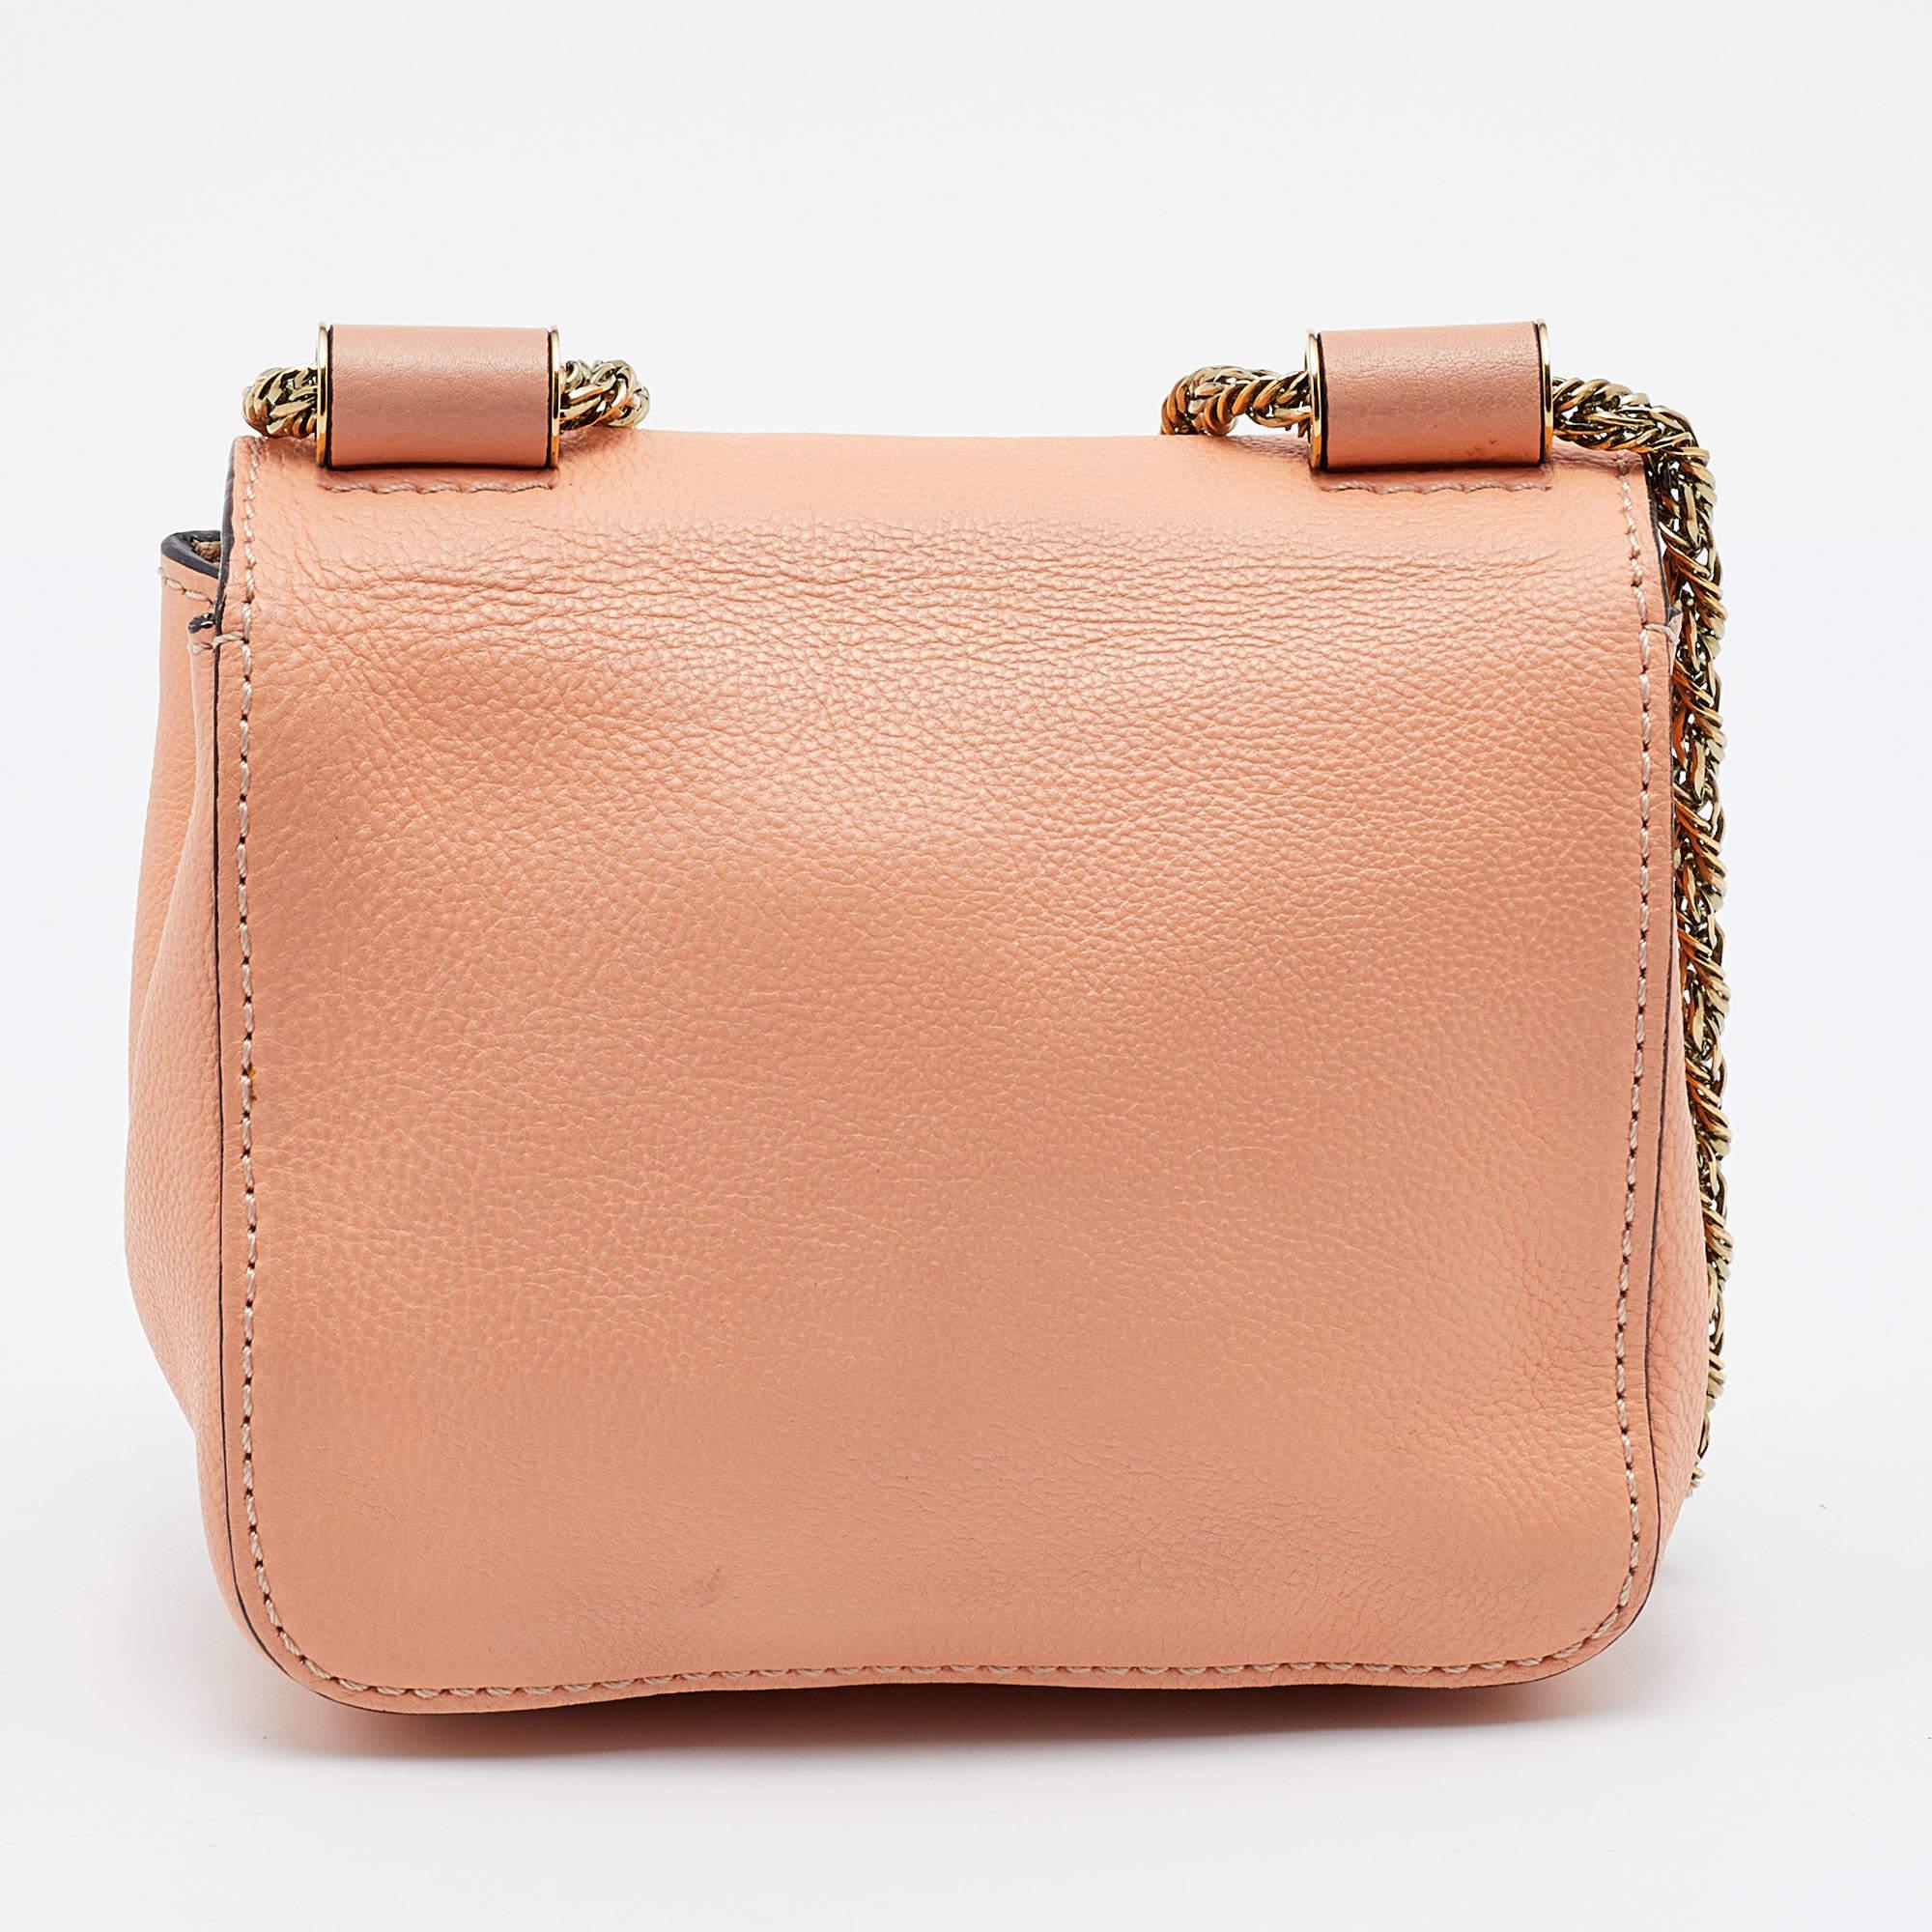 Designed to be durable, this lovely crossbody bag is a prized buy. Chic and easy to carry, the creation comes with a long shoulder strap and a spacious interior to keep your essentials safe.

Includes: Original Dustbag